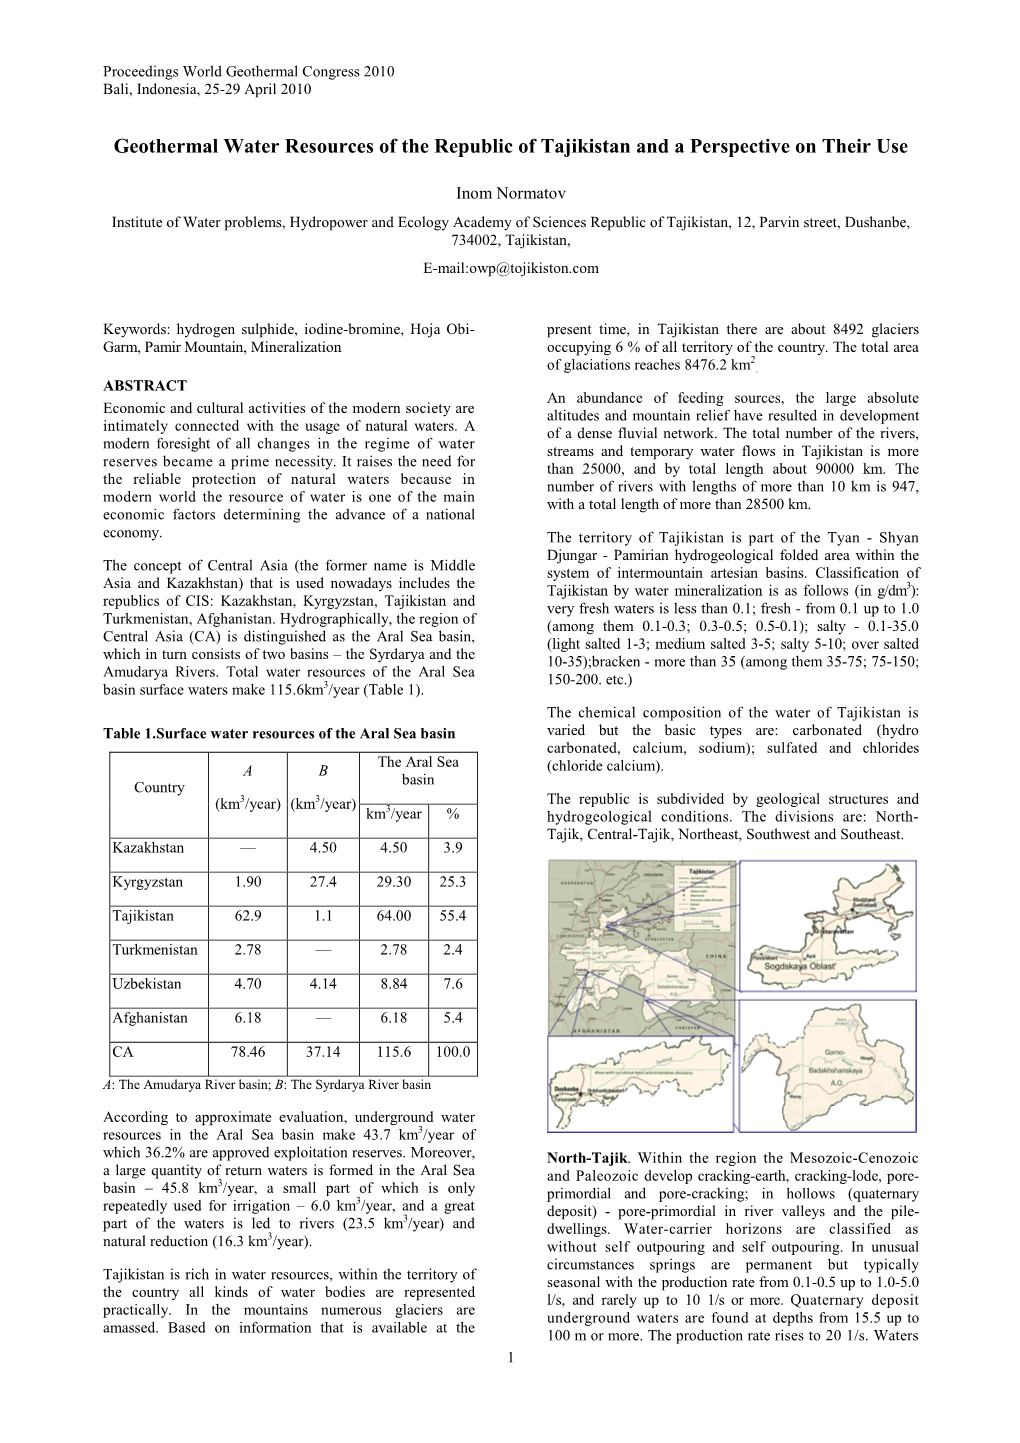 Geothermal Waters Resources of the Republic of Tajikistan And